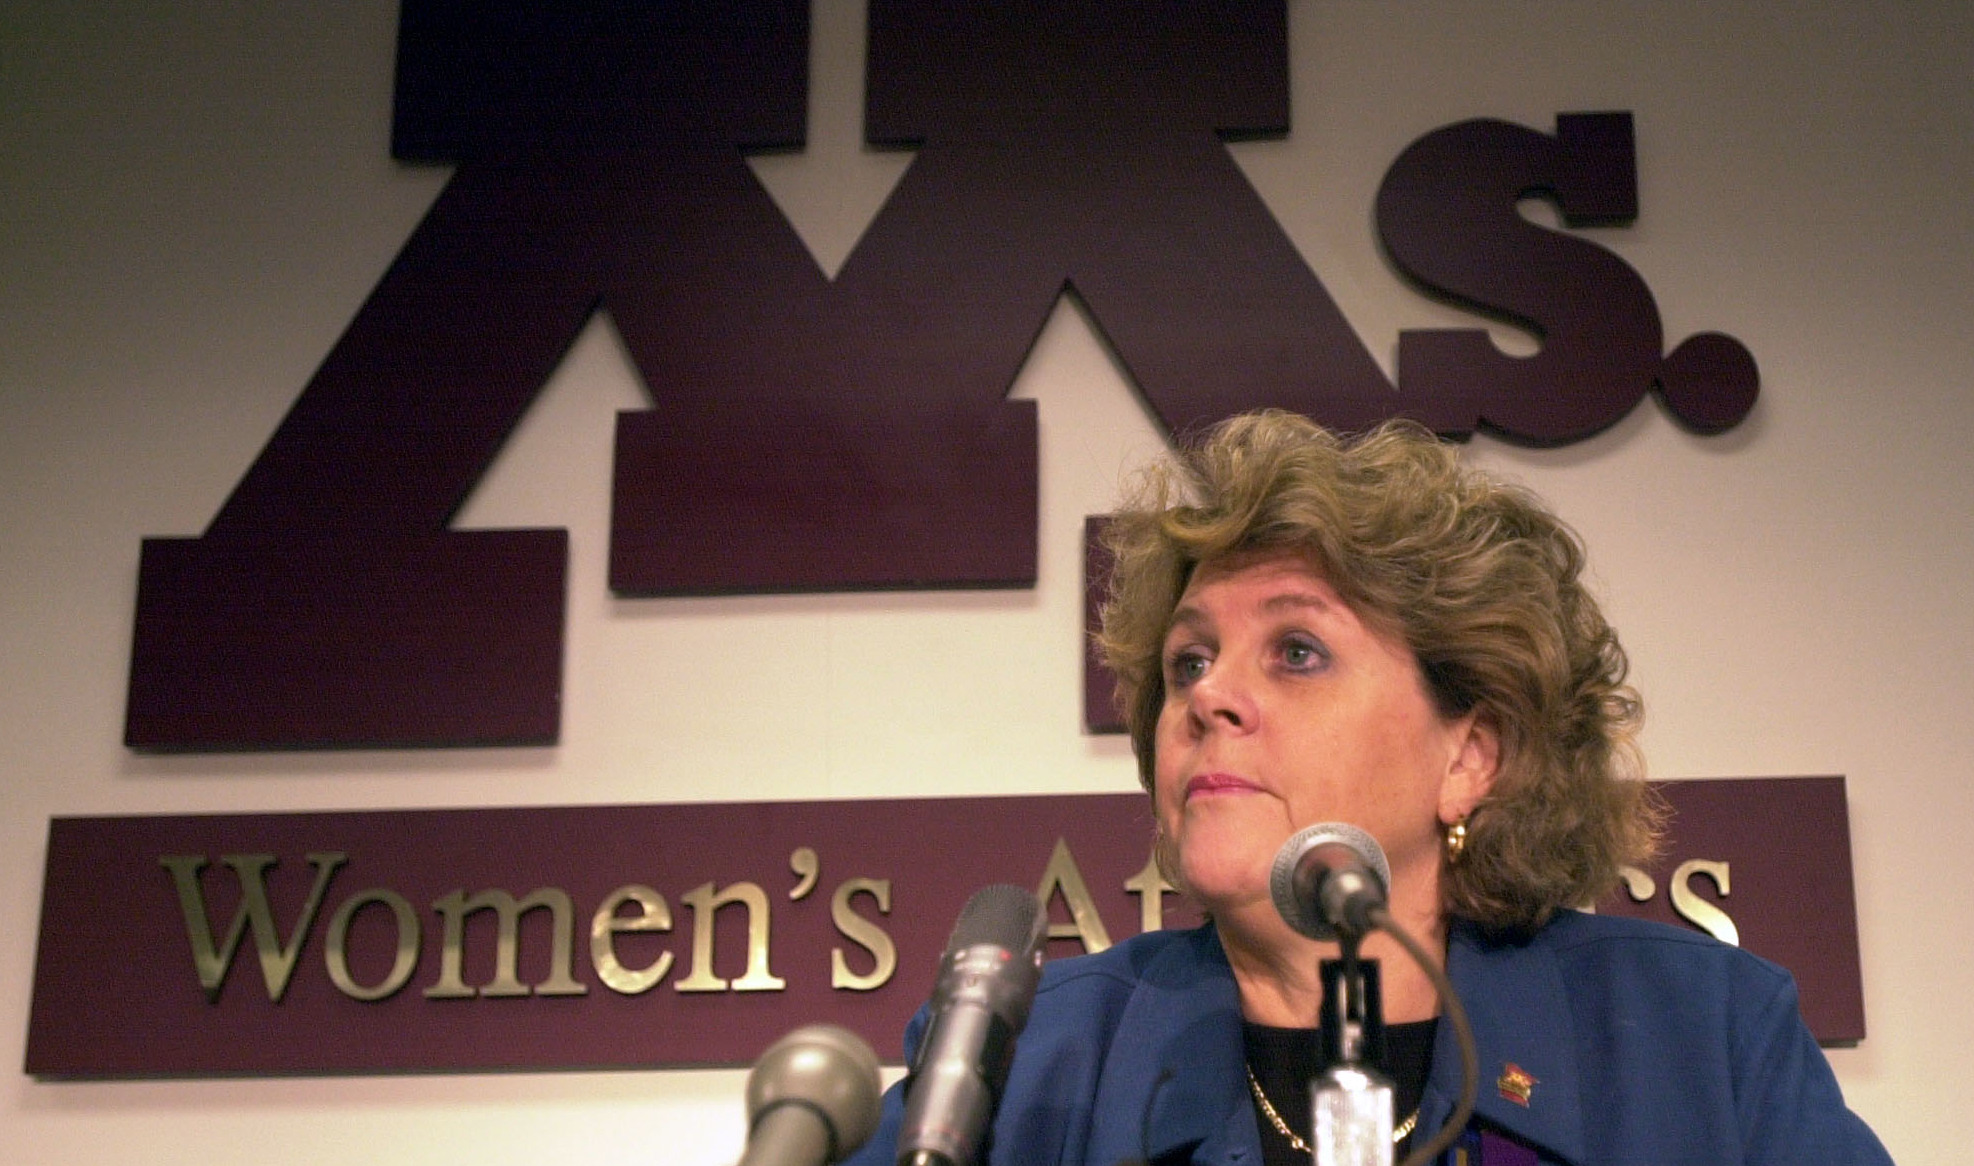 Chris Voelz in 2002, when she was women's athletic director at the University of Minnesota.